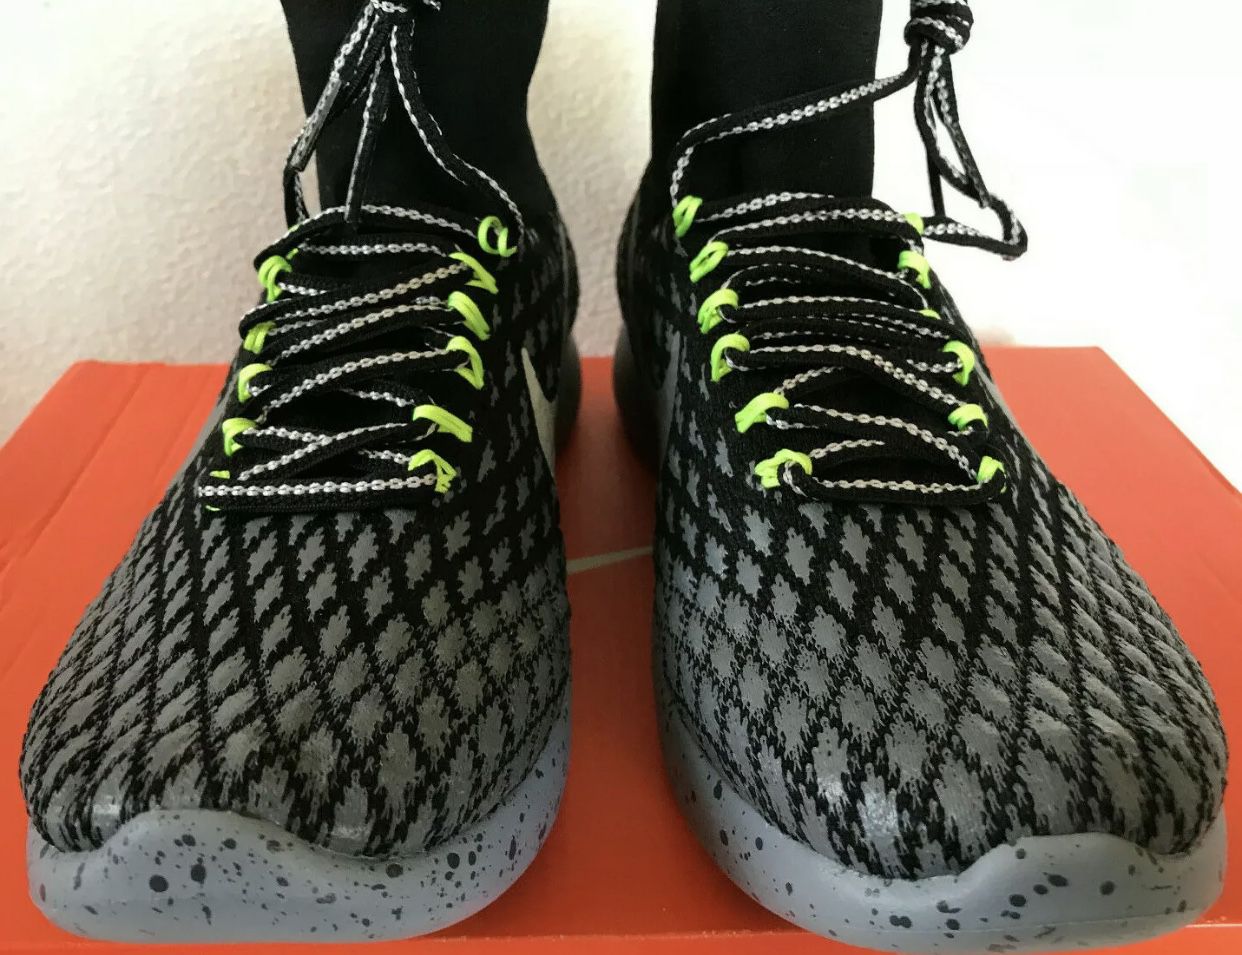 Nike Free LunarEpic Flyknit H2O Repel- size 7 for Sale Dallas, TX - OfferUp